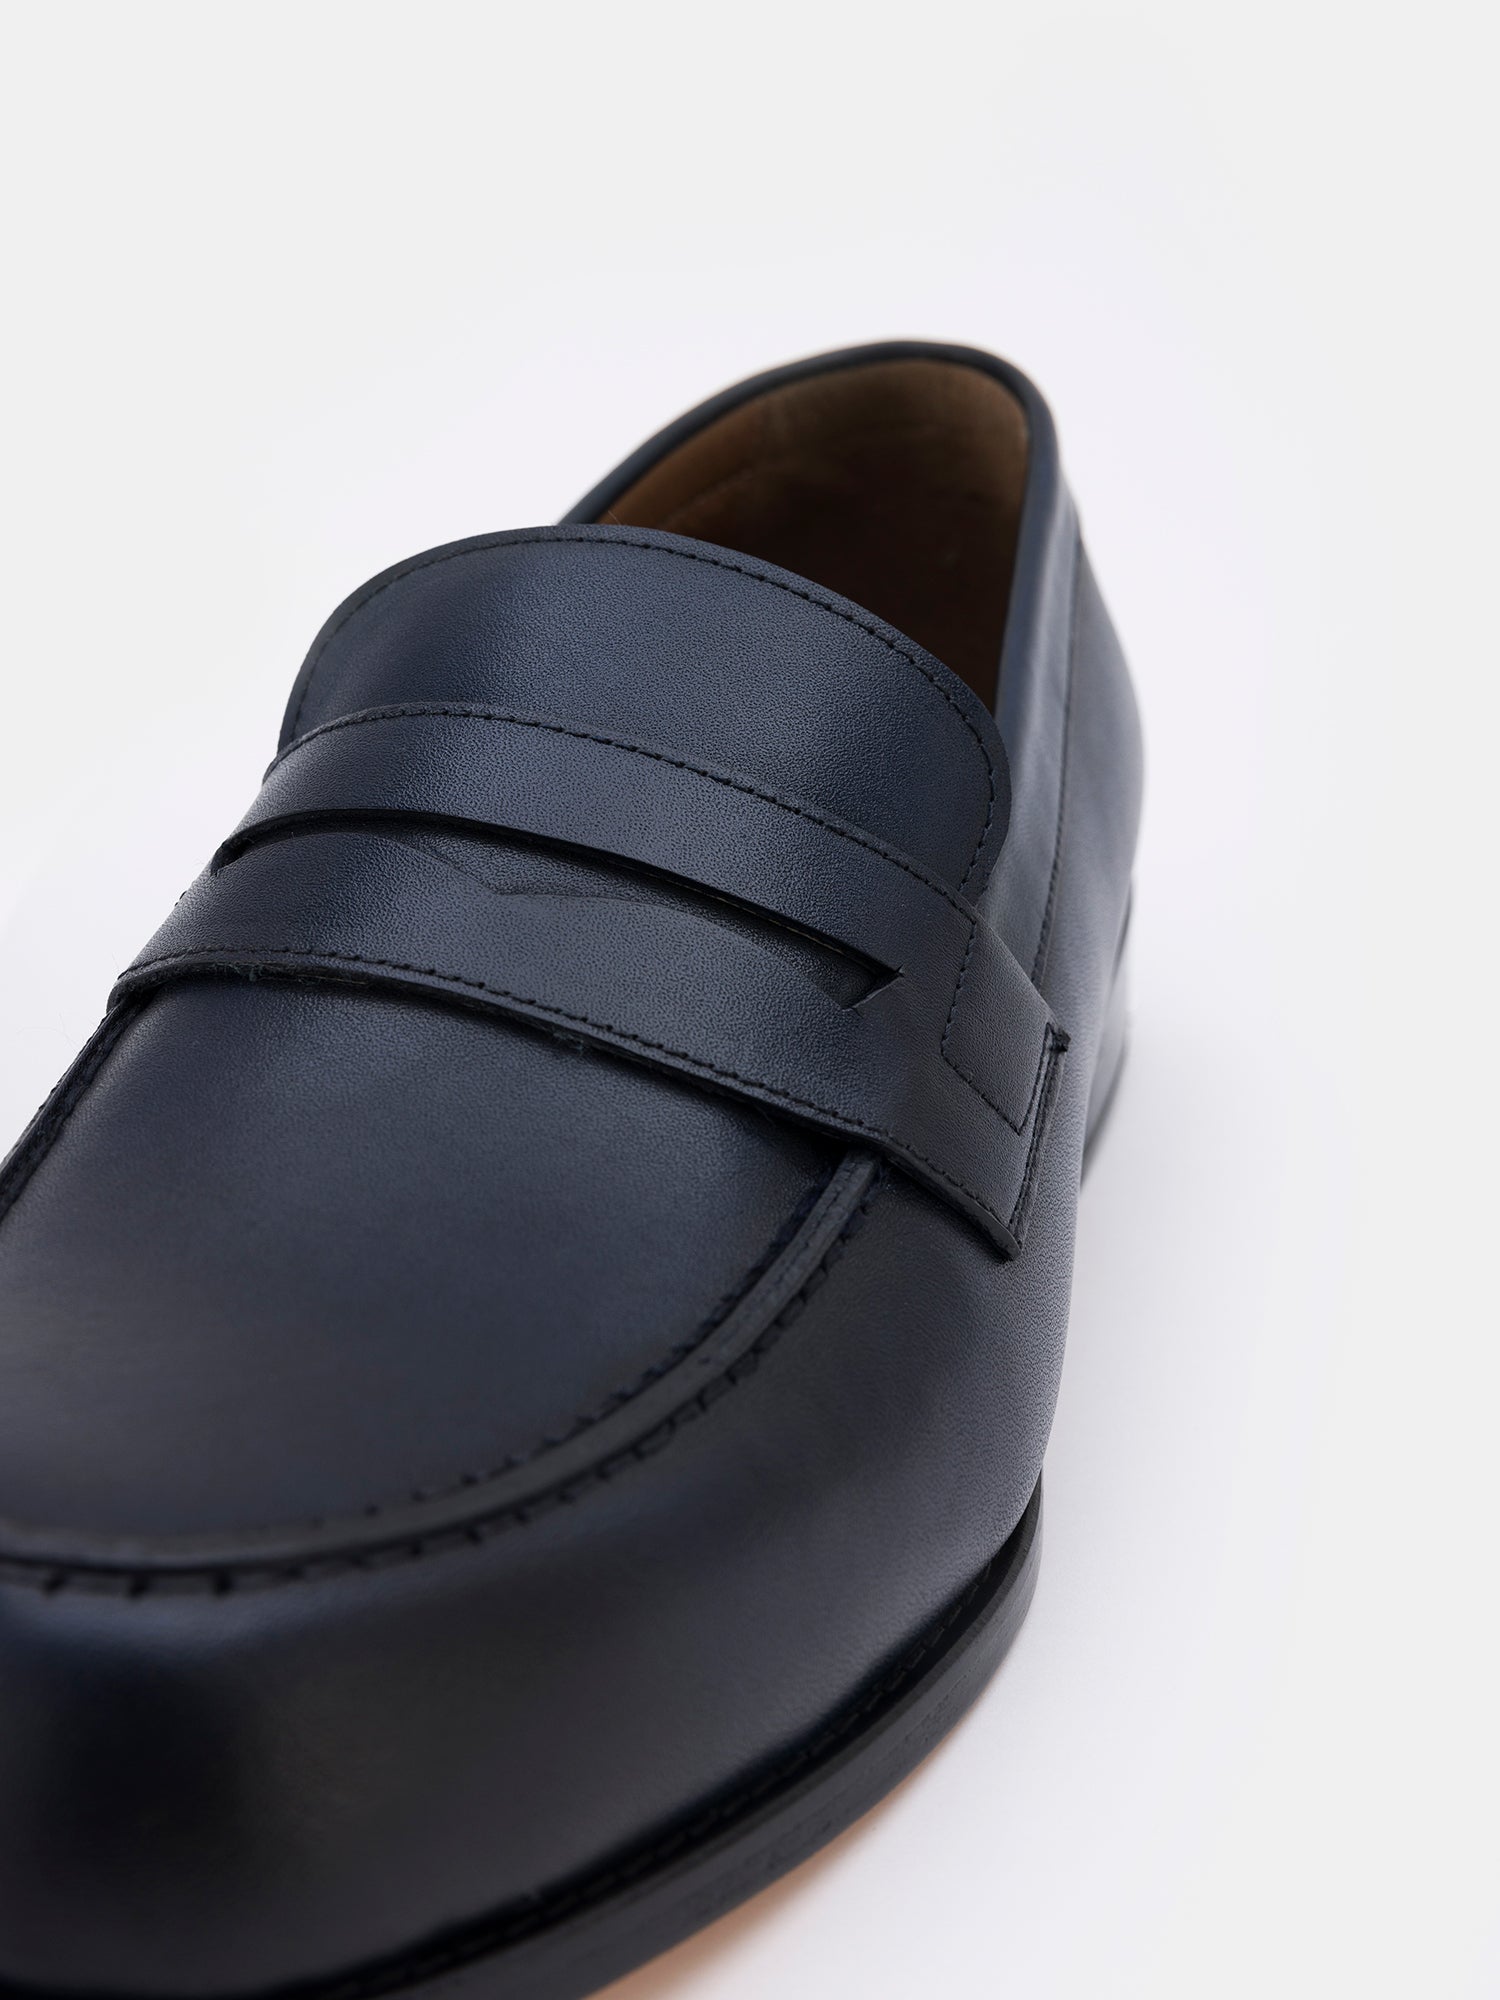 Navy Leather Penny Loafers